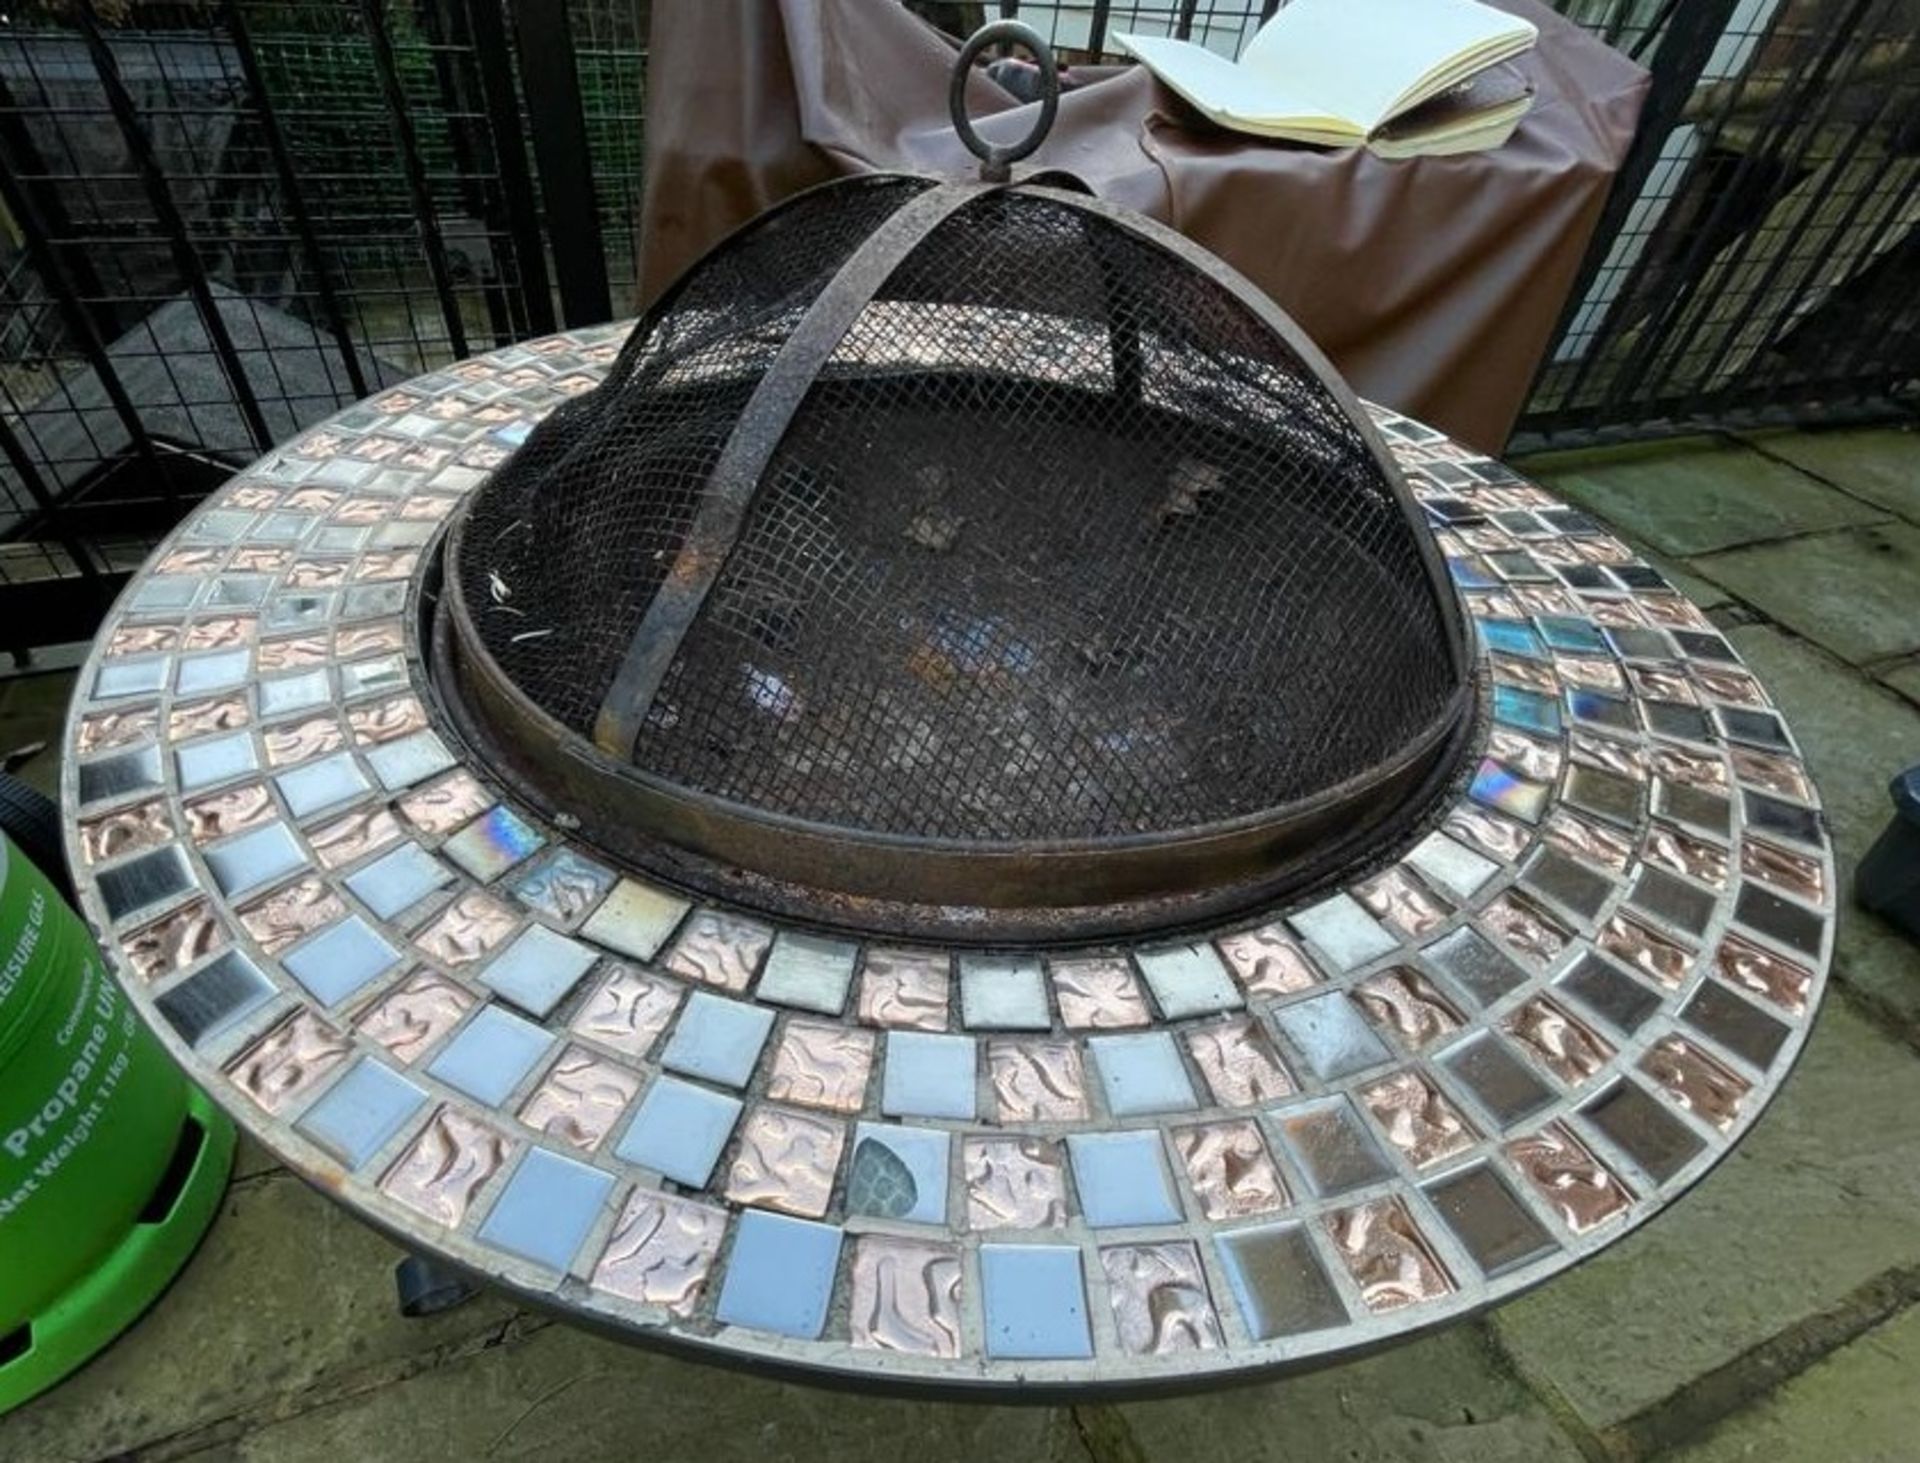 1 x Fire Pit With Tiled Surround - Preowned, From An Exclusive Property - Dimensions: Height H49cm / - Image 3 of 4